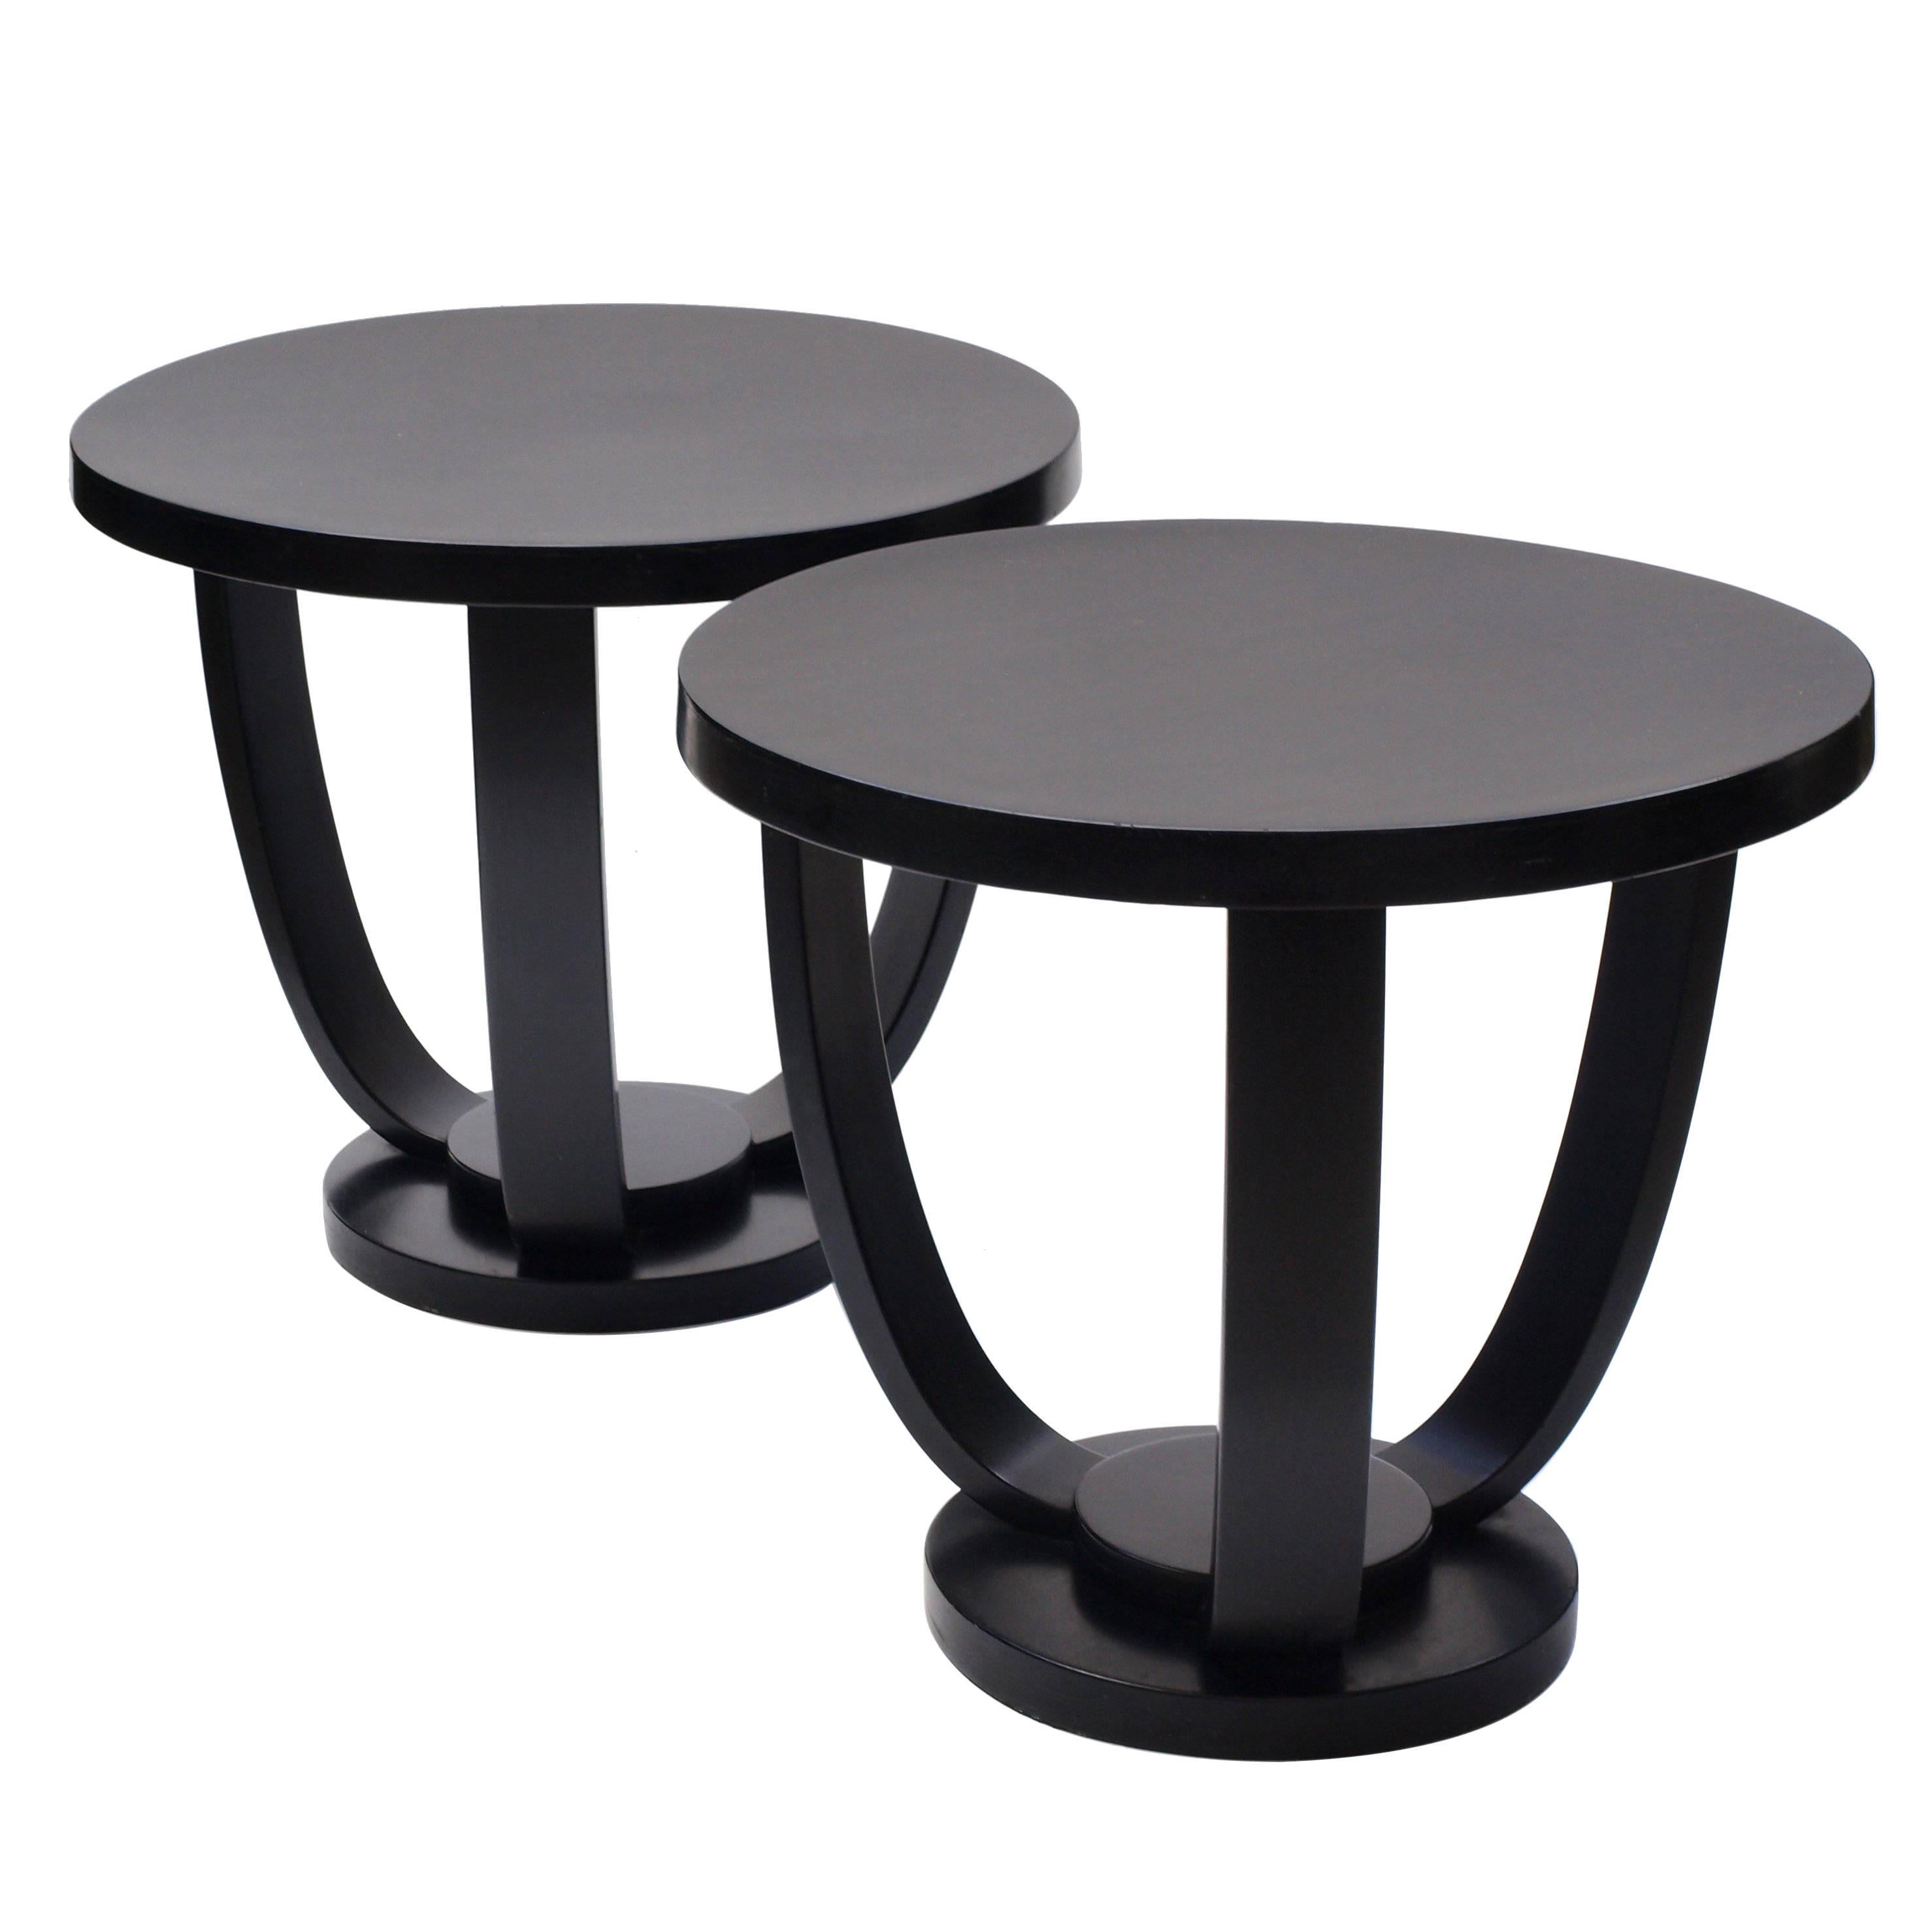 Pair of 1930s Circular Black Bent Wood Side Tables by Fischel